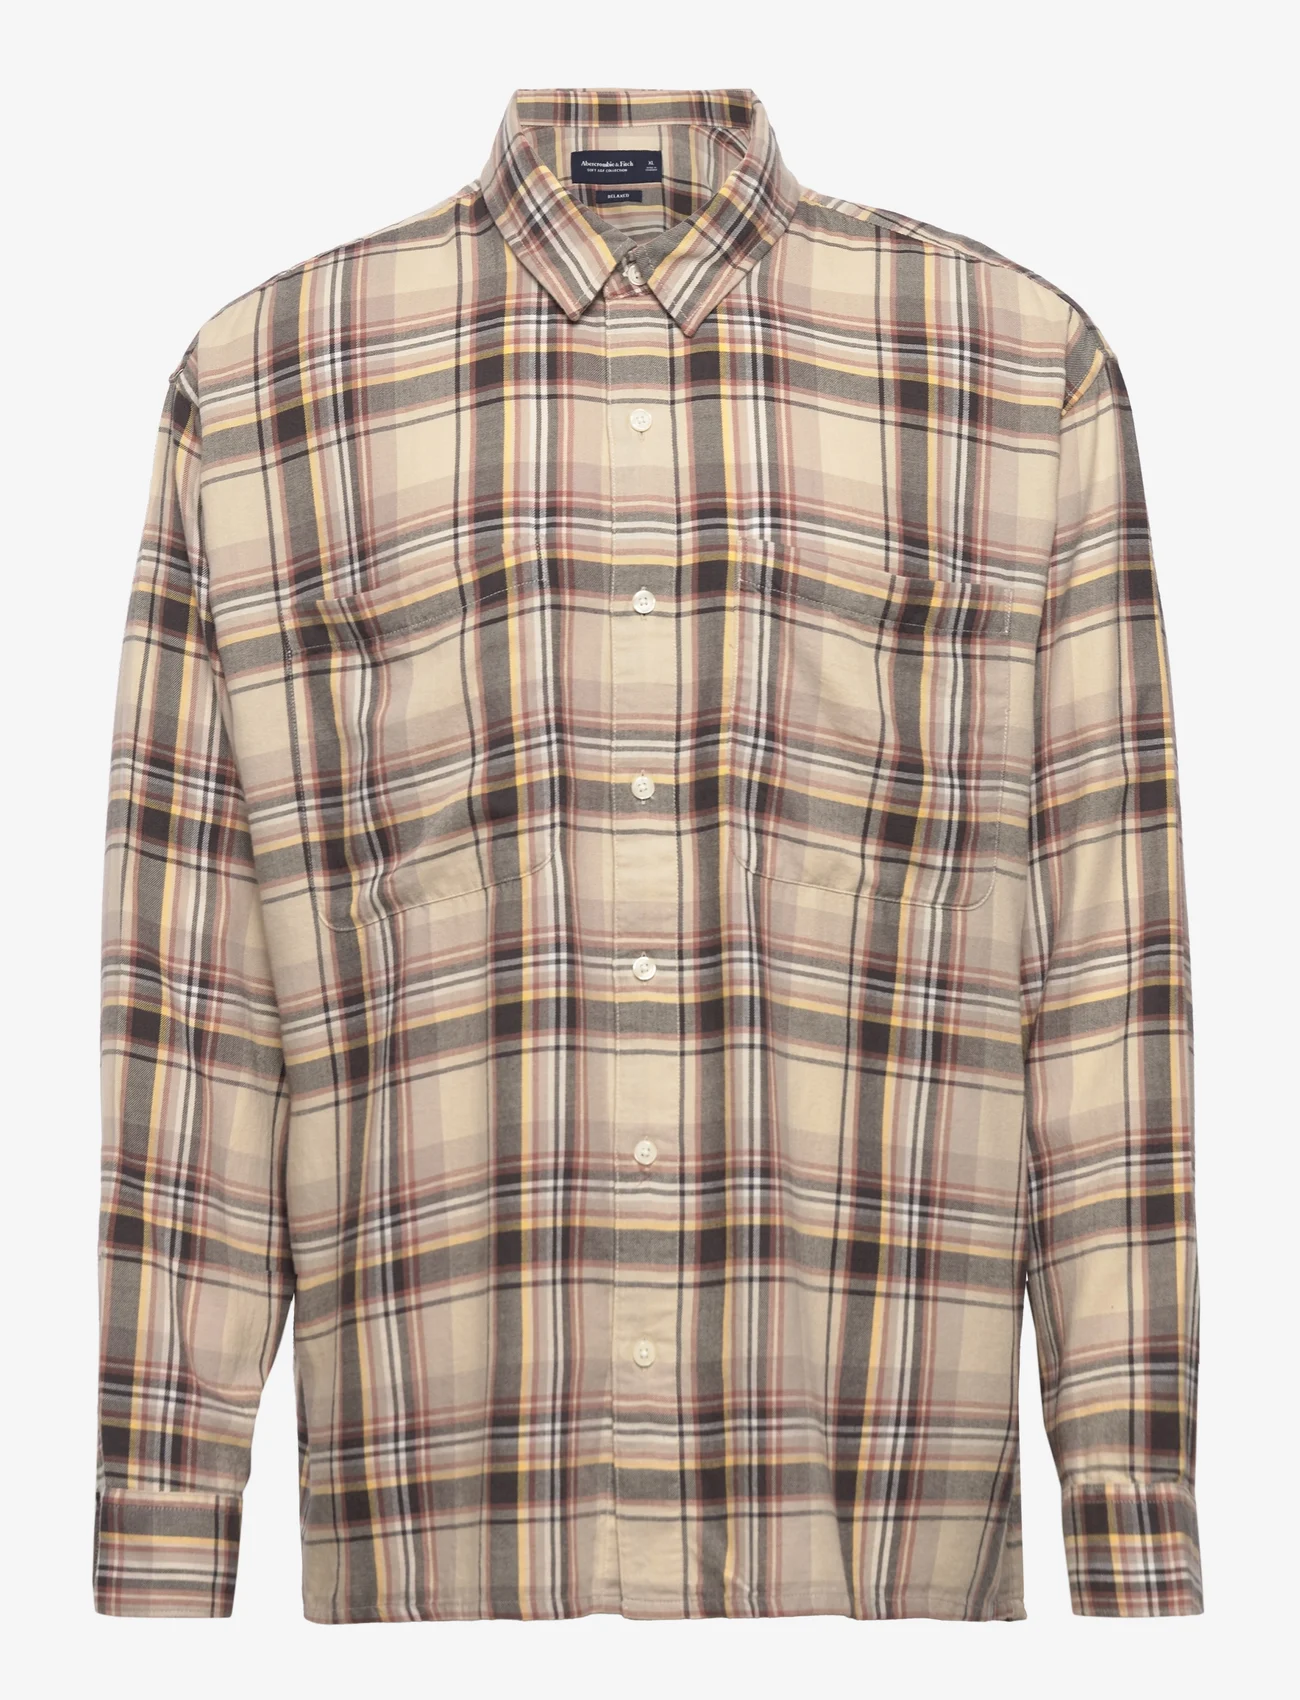 Abercrombie & Fitch - ANF MENS WOVENS - checkered shirts - brown plaid - 0